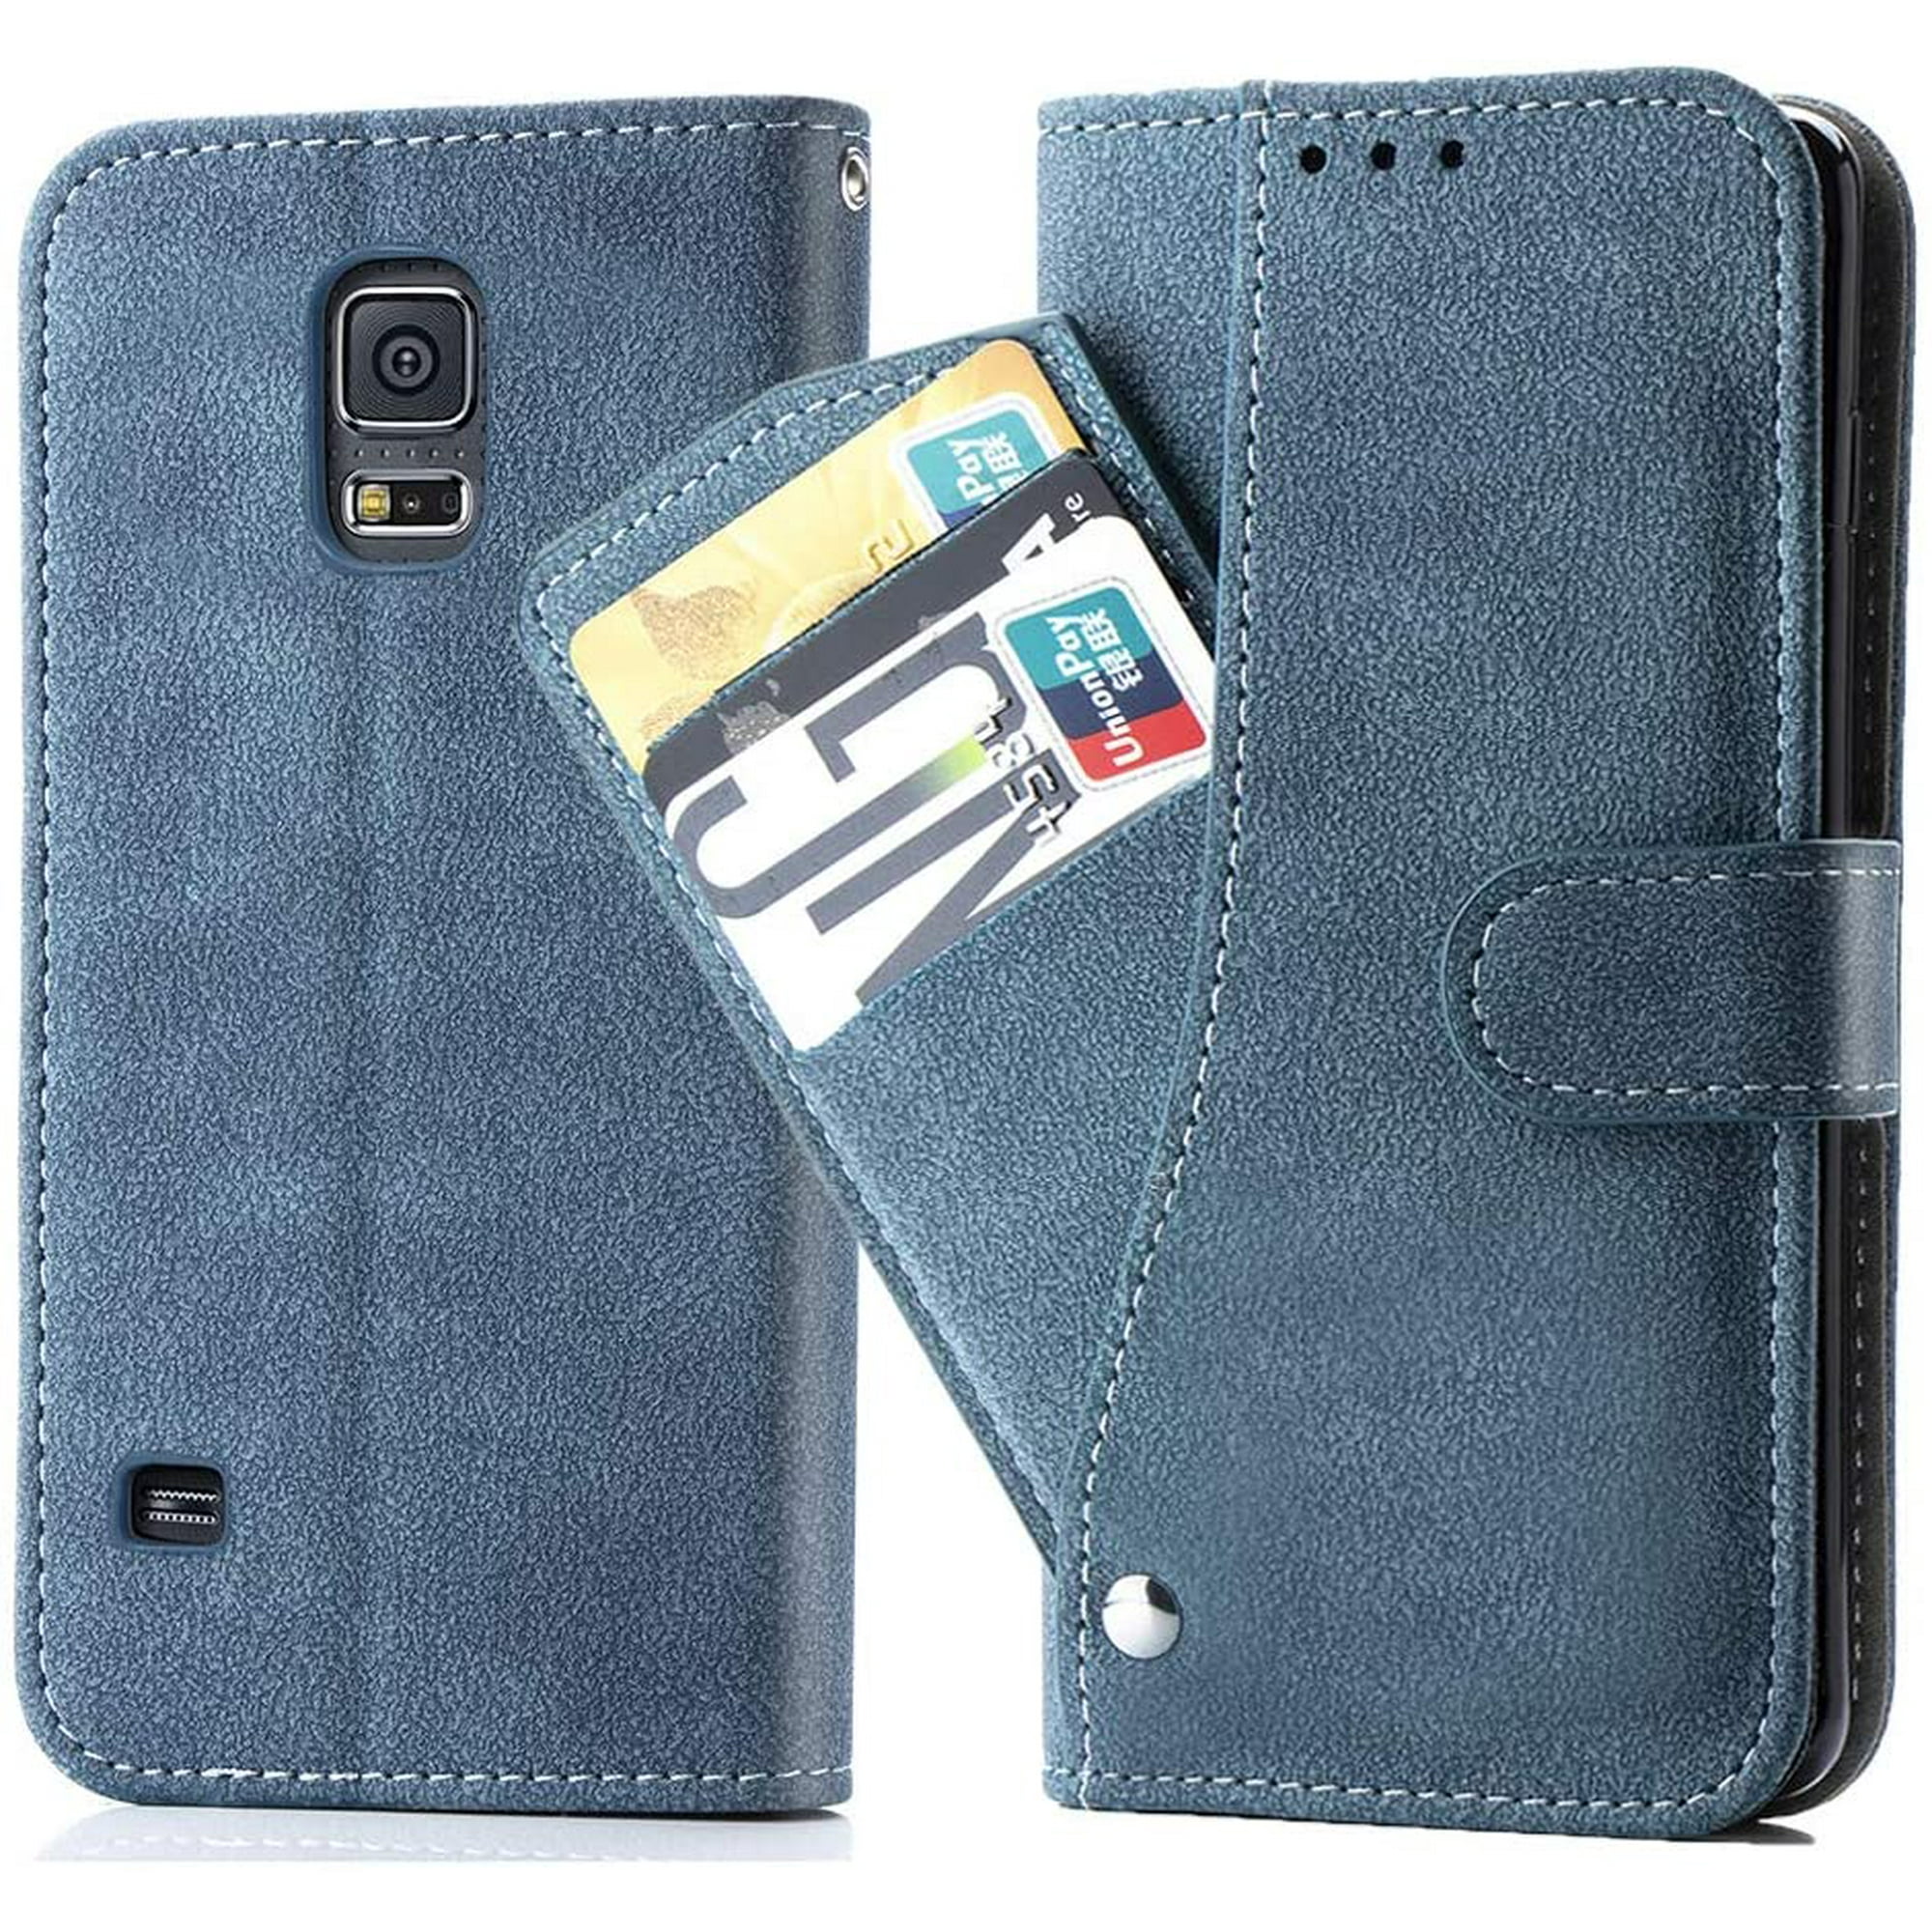 Asuwish Samsung Galaxy S5 / S5 Neo Wallet Case,Luxury Leather Phone Cases  with Credit Card Holder Slot Kickstand Stand Shockproof Flip Folio  Protective Cover for Galaxy S5/S5 Neo Women Men Blue